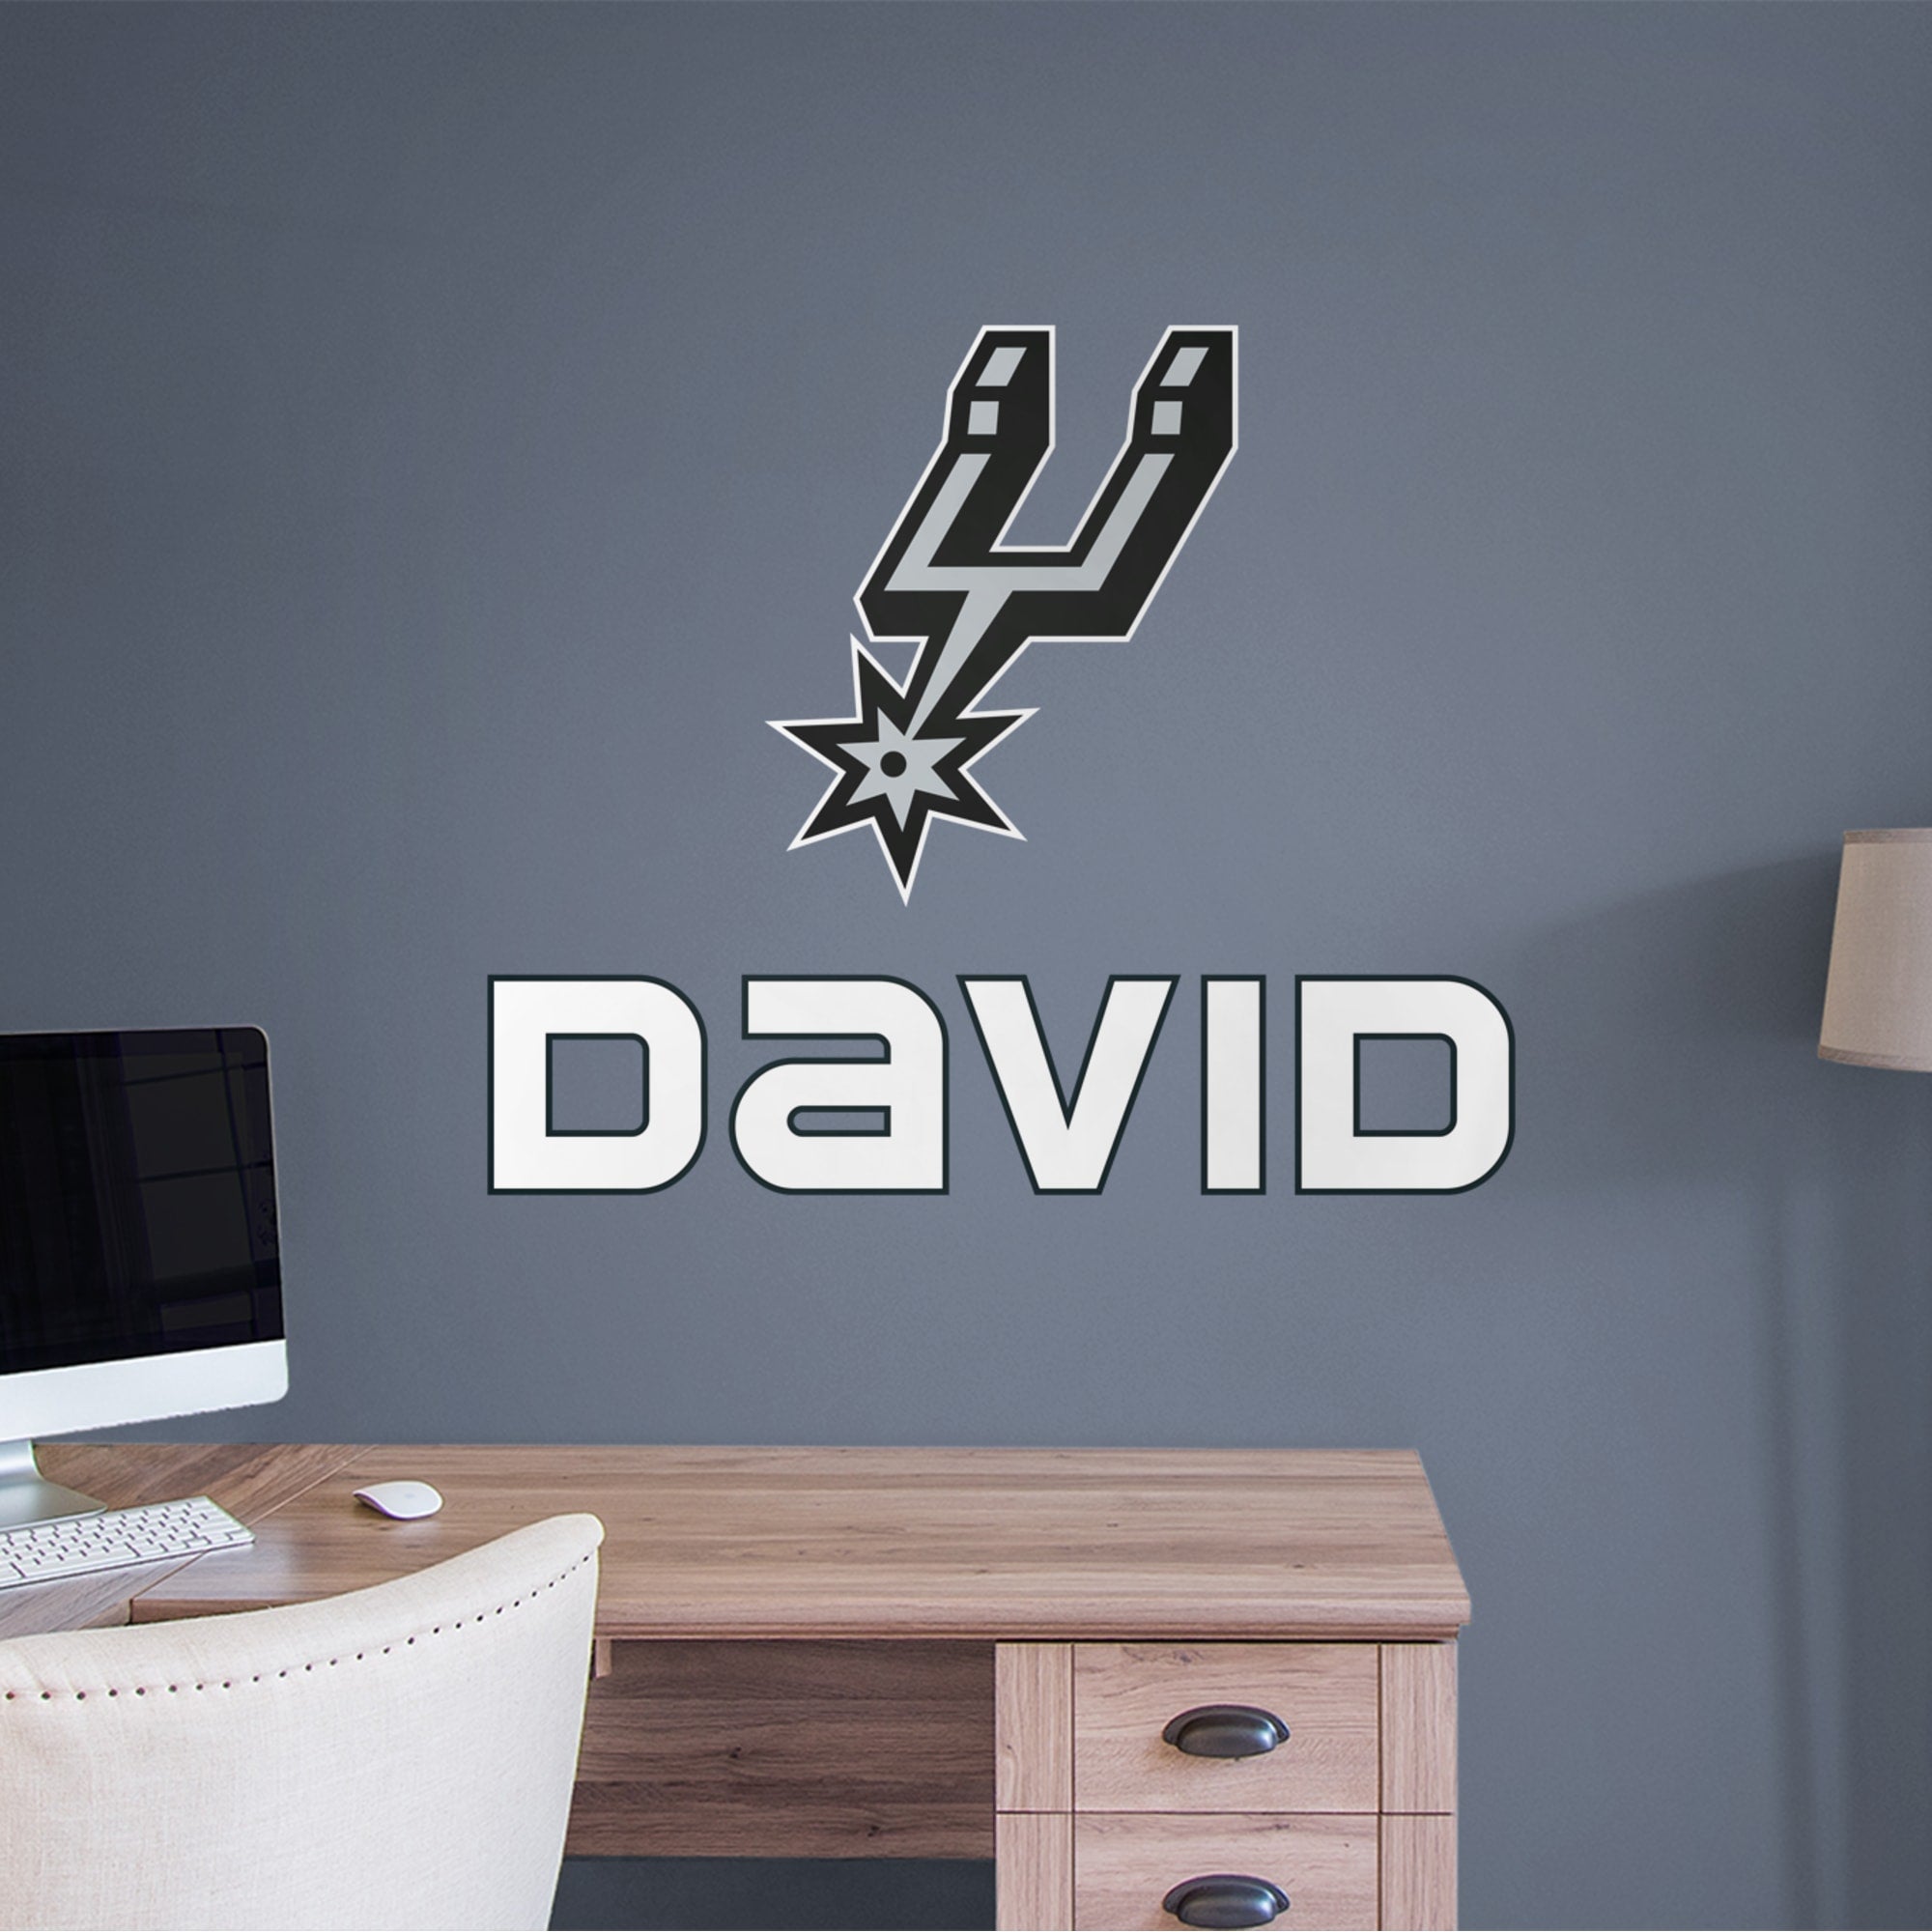 San Antonio Spurs: Stacked Personalized Name - Officially Licensed NBA Transfer Decal in White (39.5"W x 52"H) by Fathead | Viny